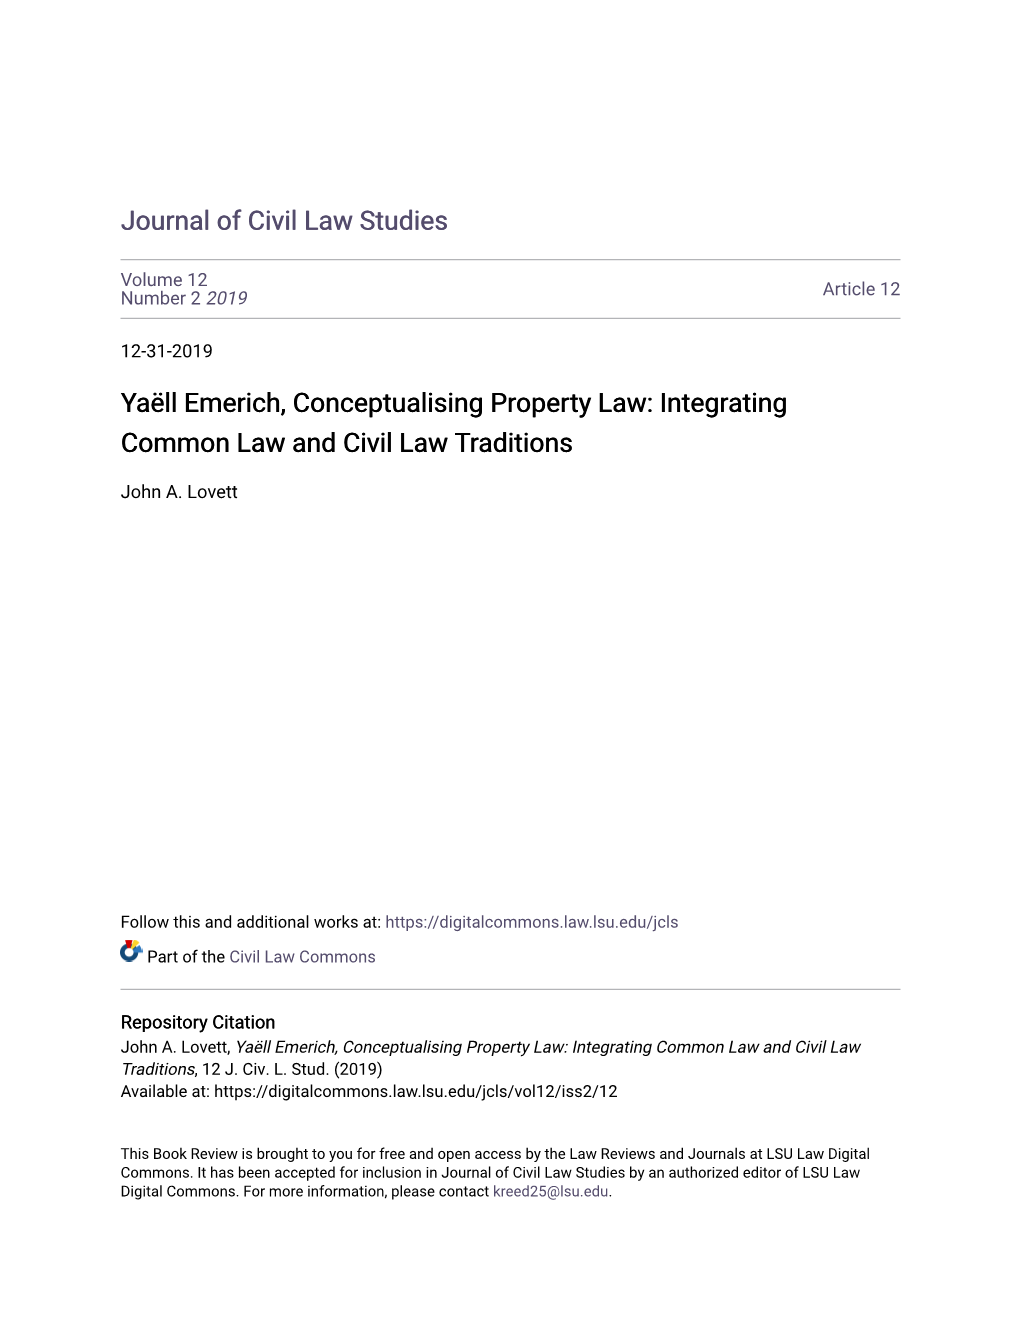 Yaã«Ll Emerich, Conceptualising Property Law: Integrating Common Law and Civil Law Traditions